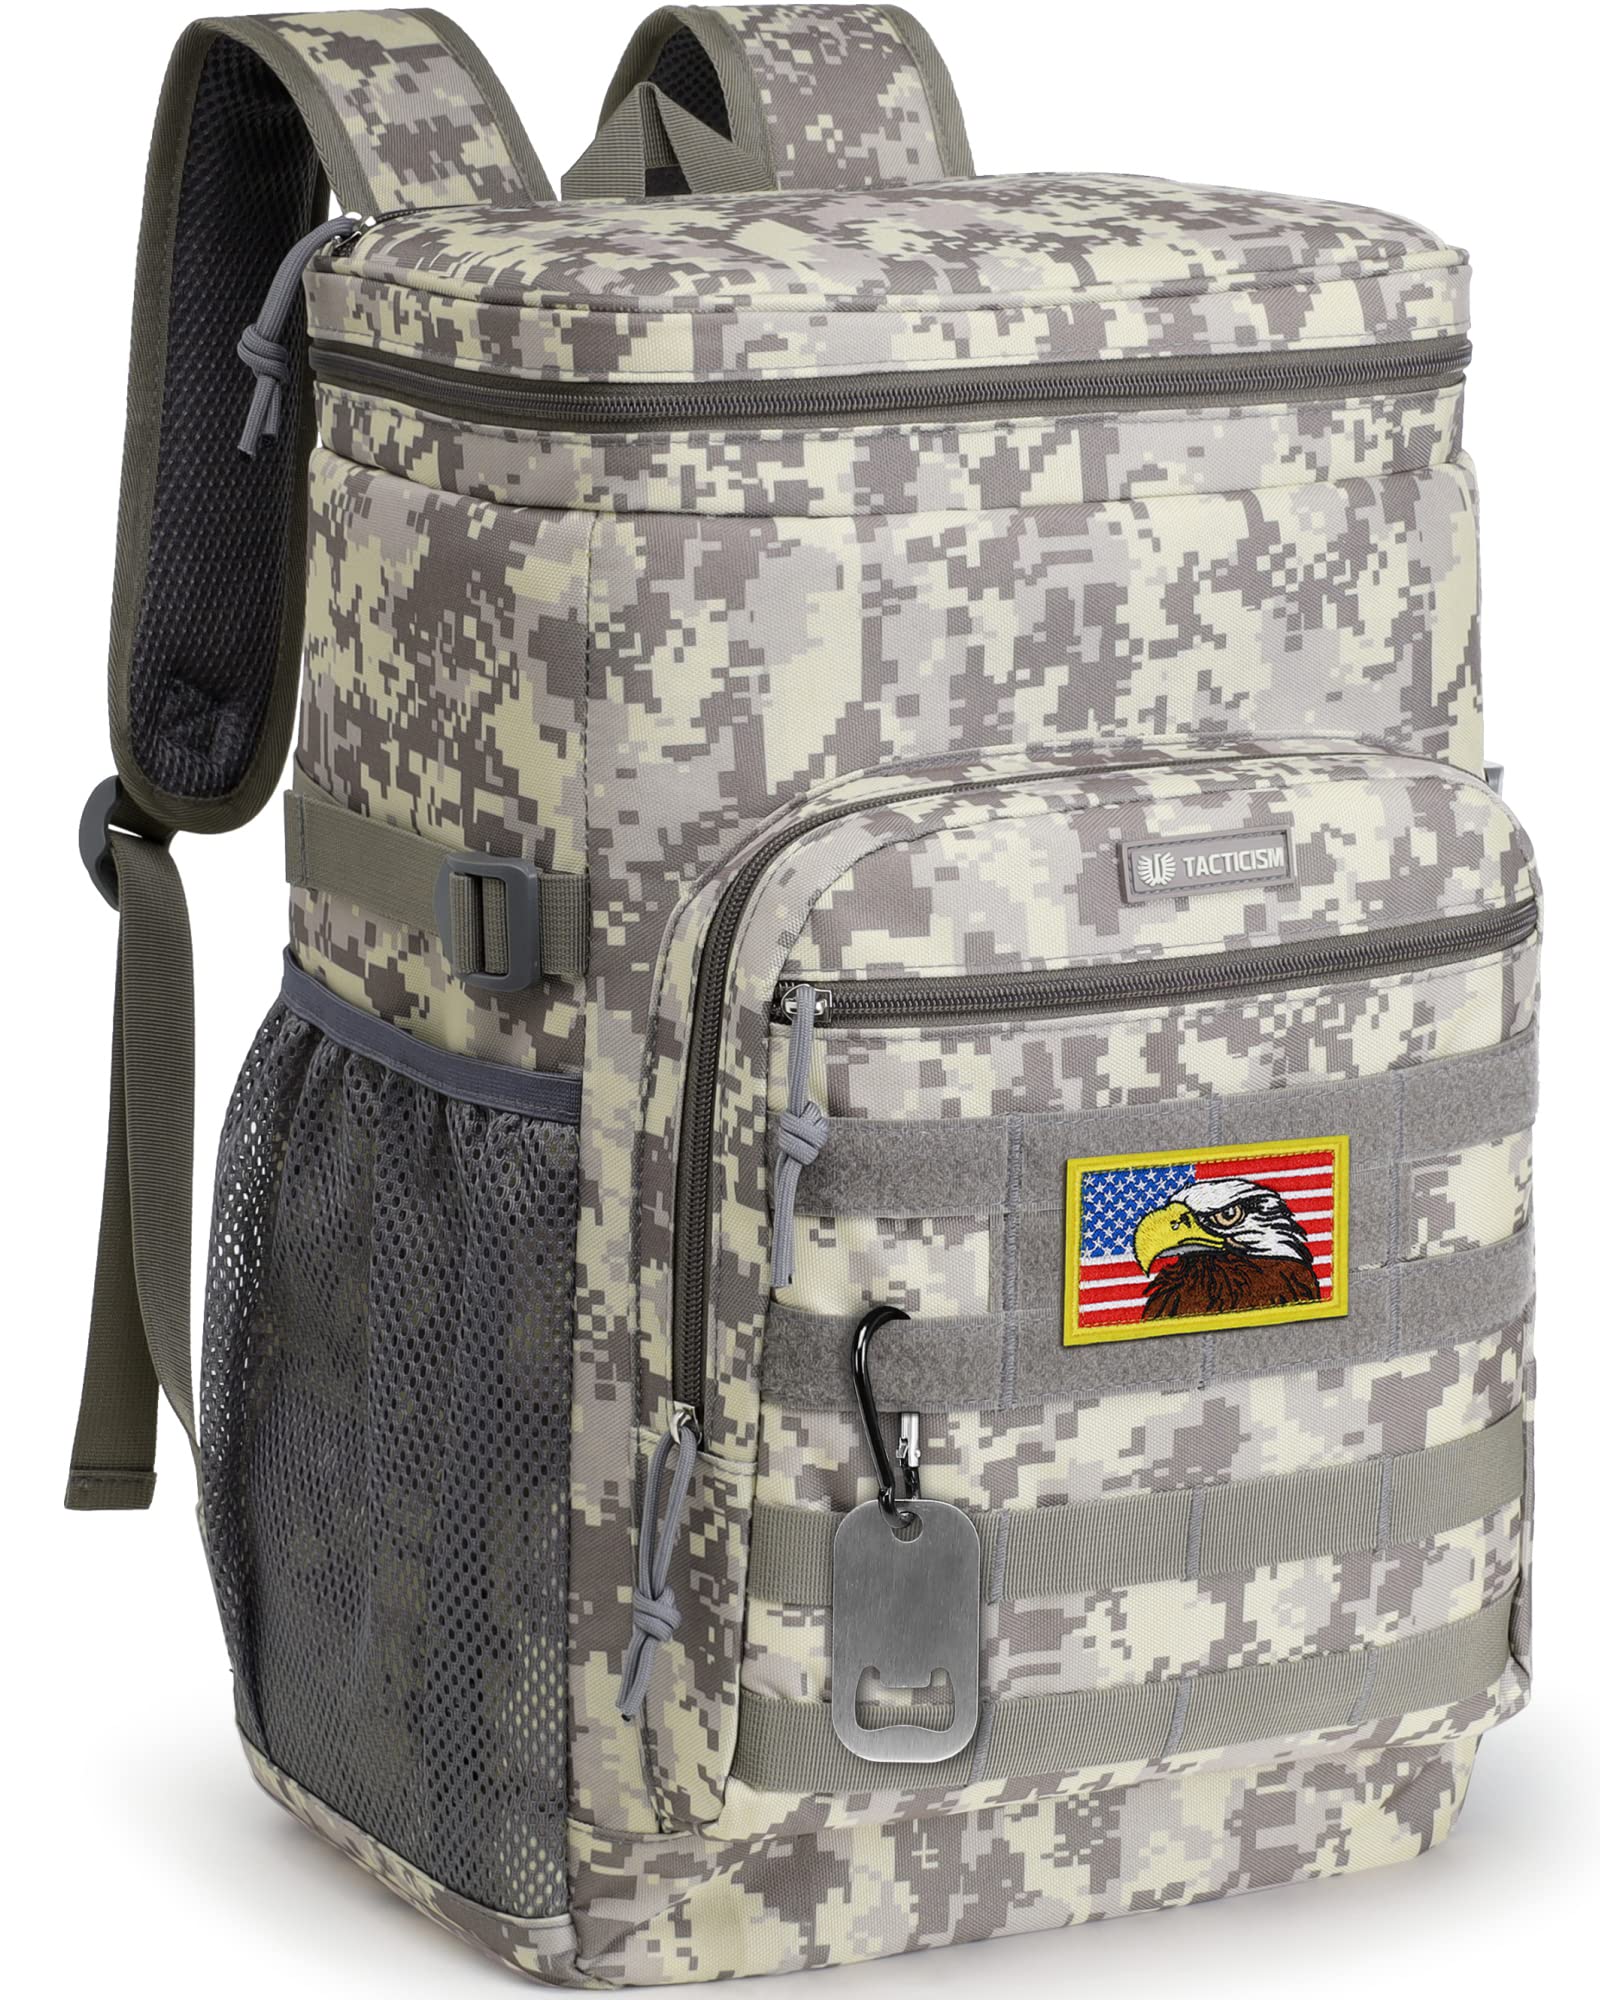 Backpack coolers insulated leak proof